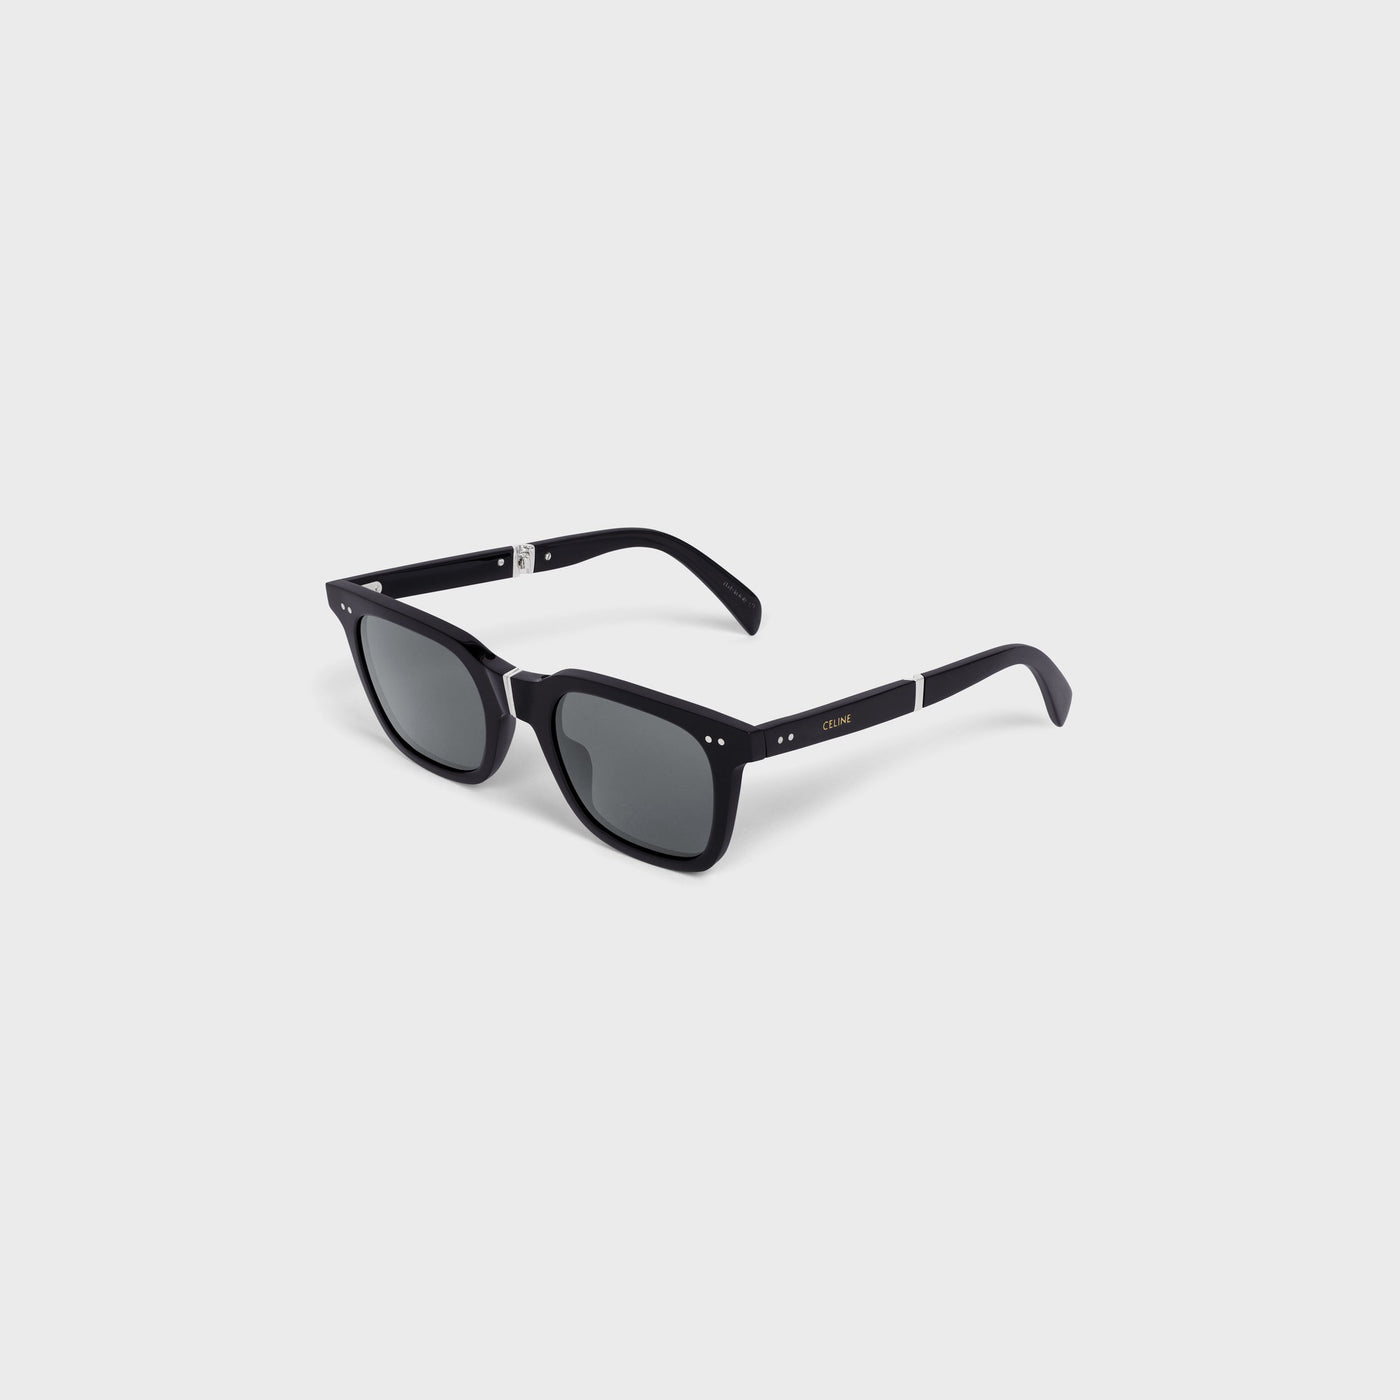 BLACK FRAME 44 SUNGLASSES IN ACETATE WITH METAL